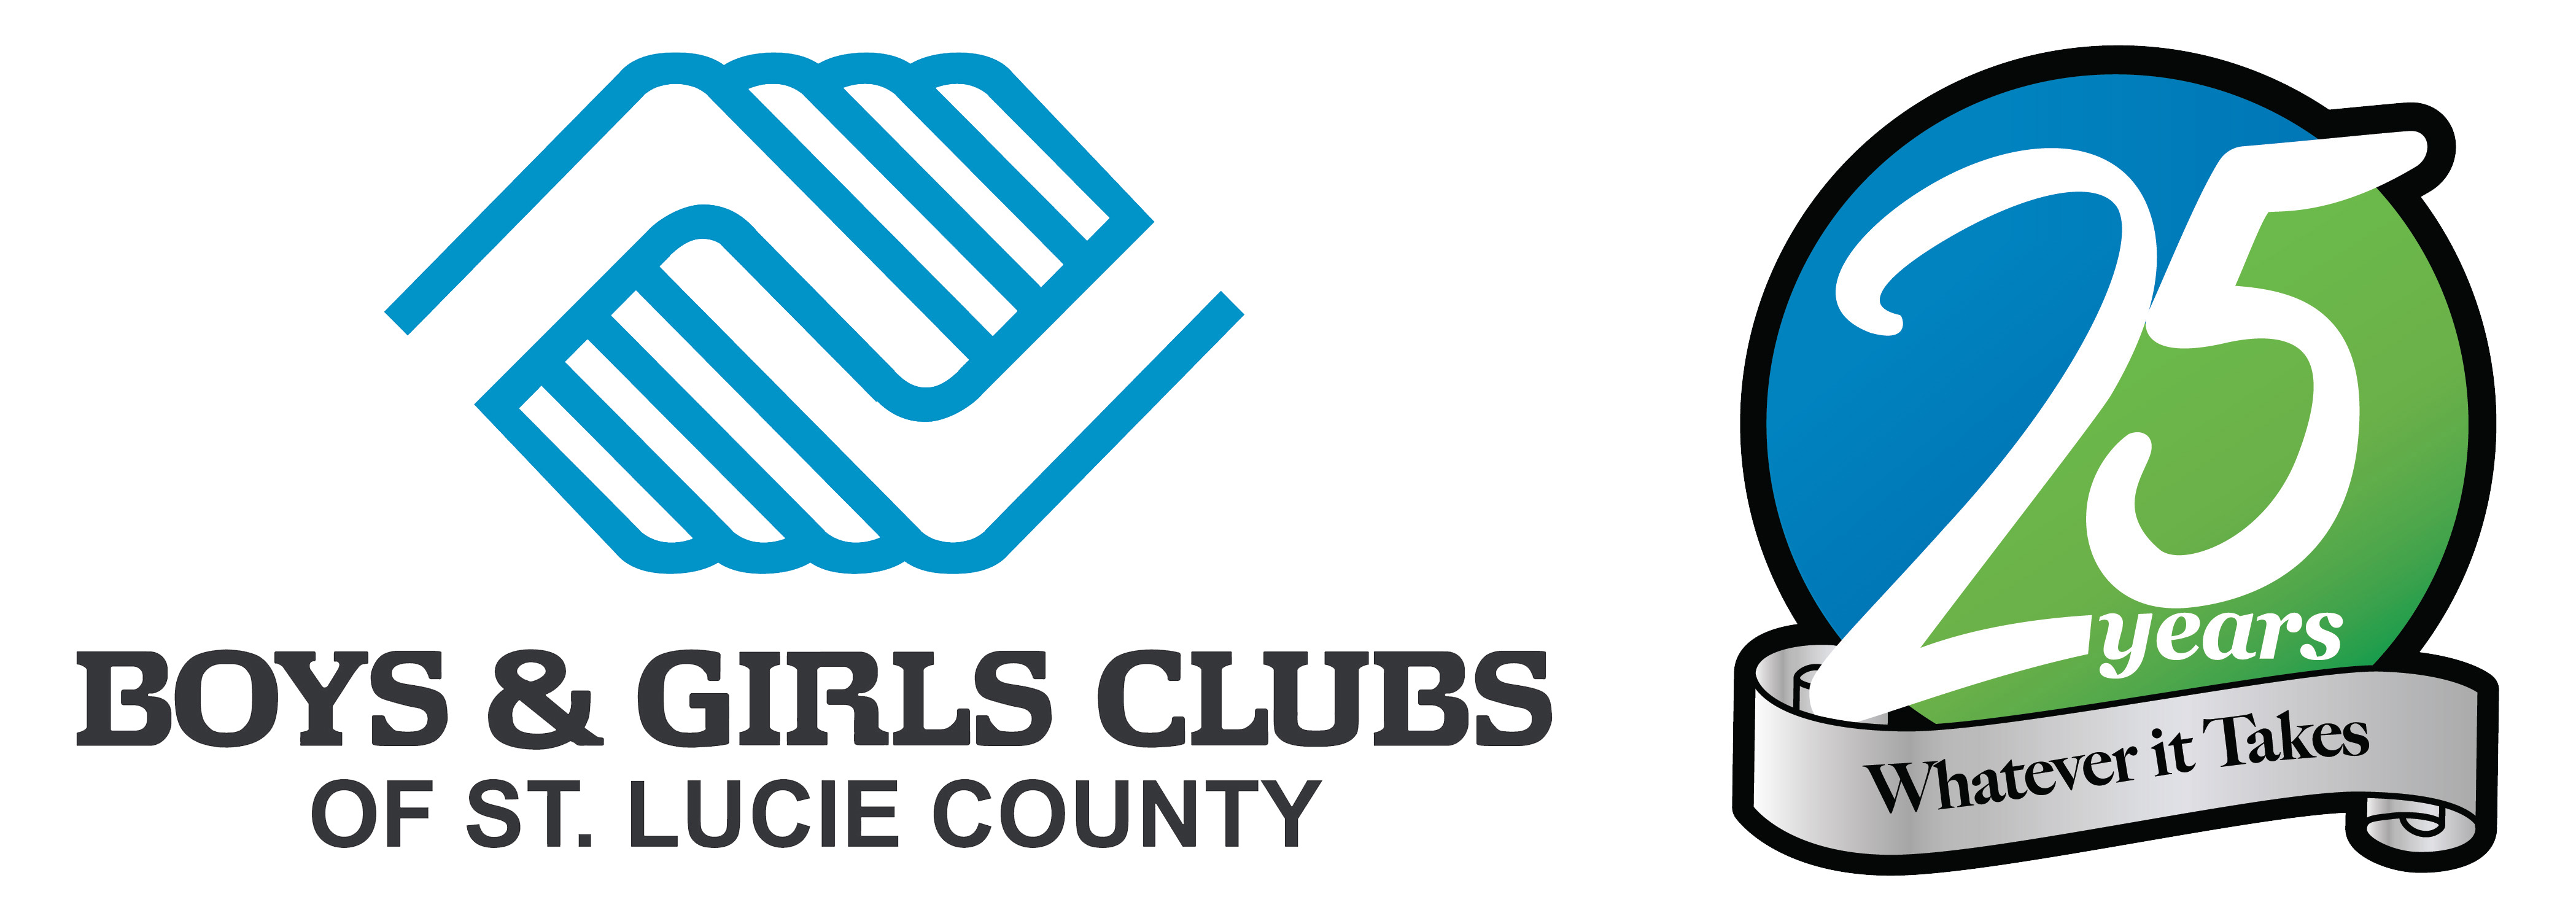 Boys & Girls Clubs of St. Lucie County logo